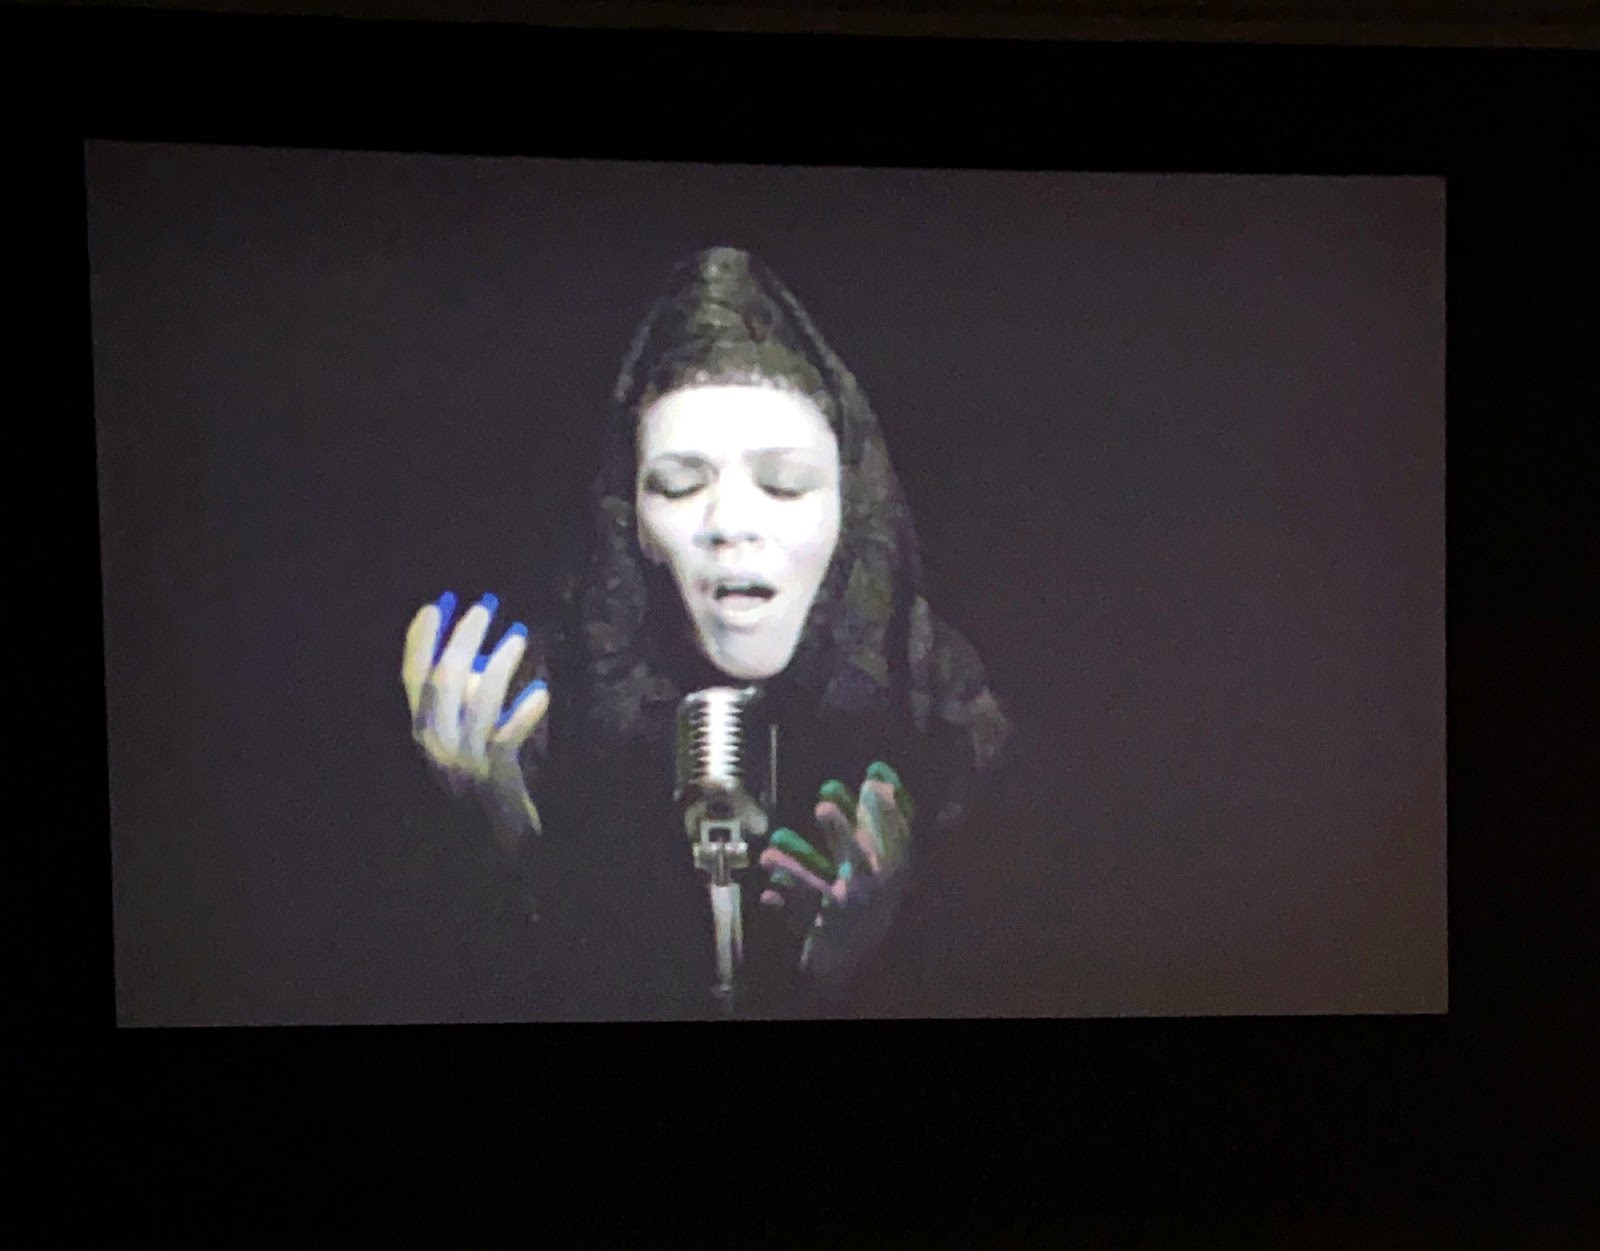 Image: Shirin Neshat, Turbulent (still), 1998, two-channel video installation, 16mm black and white film transferred to video. A photograph of a video projection on a black wall. Sussan Deyhim, an Iranian singer, is pictured from the chest up in front of a microphone. She wears all black, including a black veil over her head. Her face is exposed; her eyes are closed and her mouth is open in song. Her hands are lifted toward the microphone. There is slight discoloration and echo of her hands as they were photographed while in motion. Photo by Jessica Hammie. 